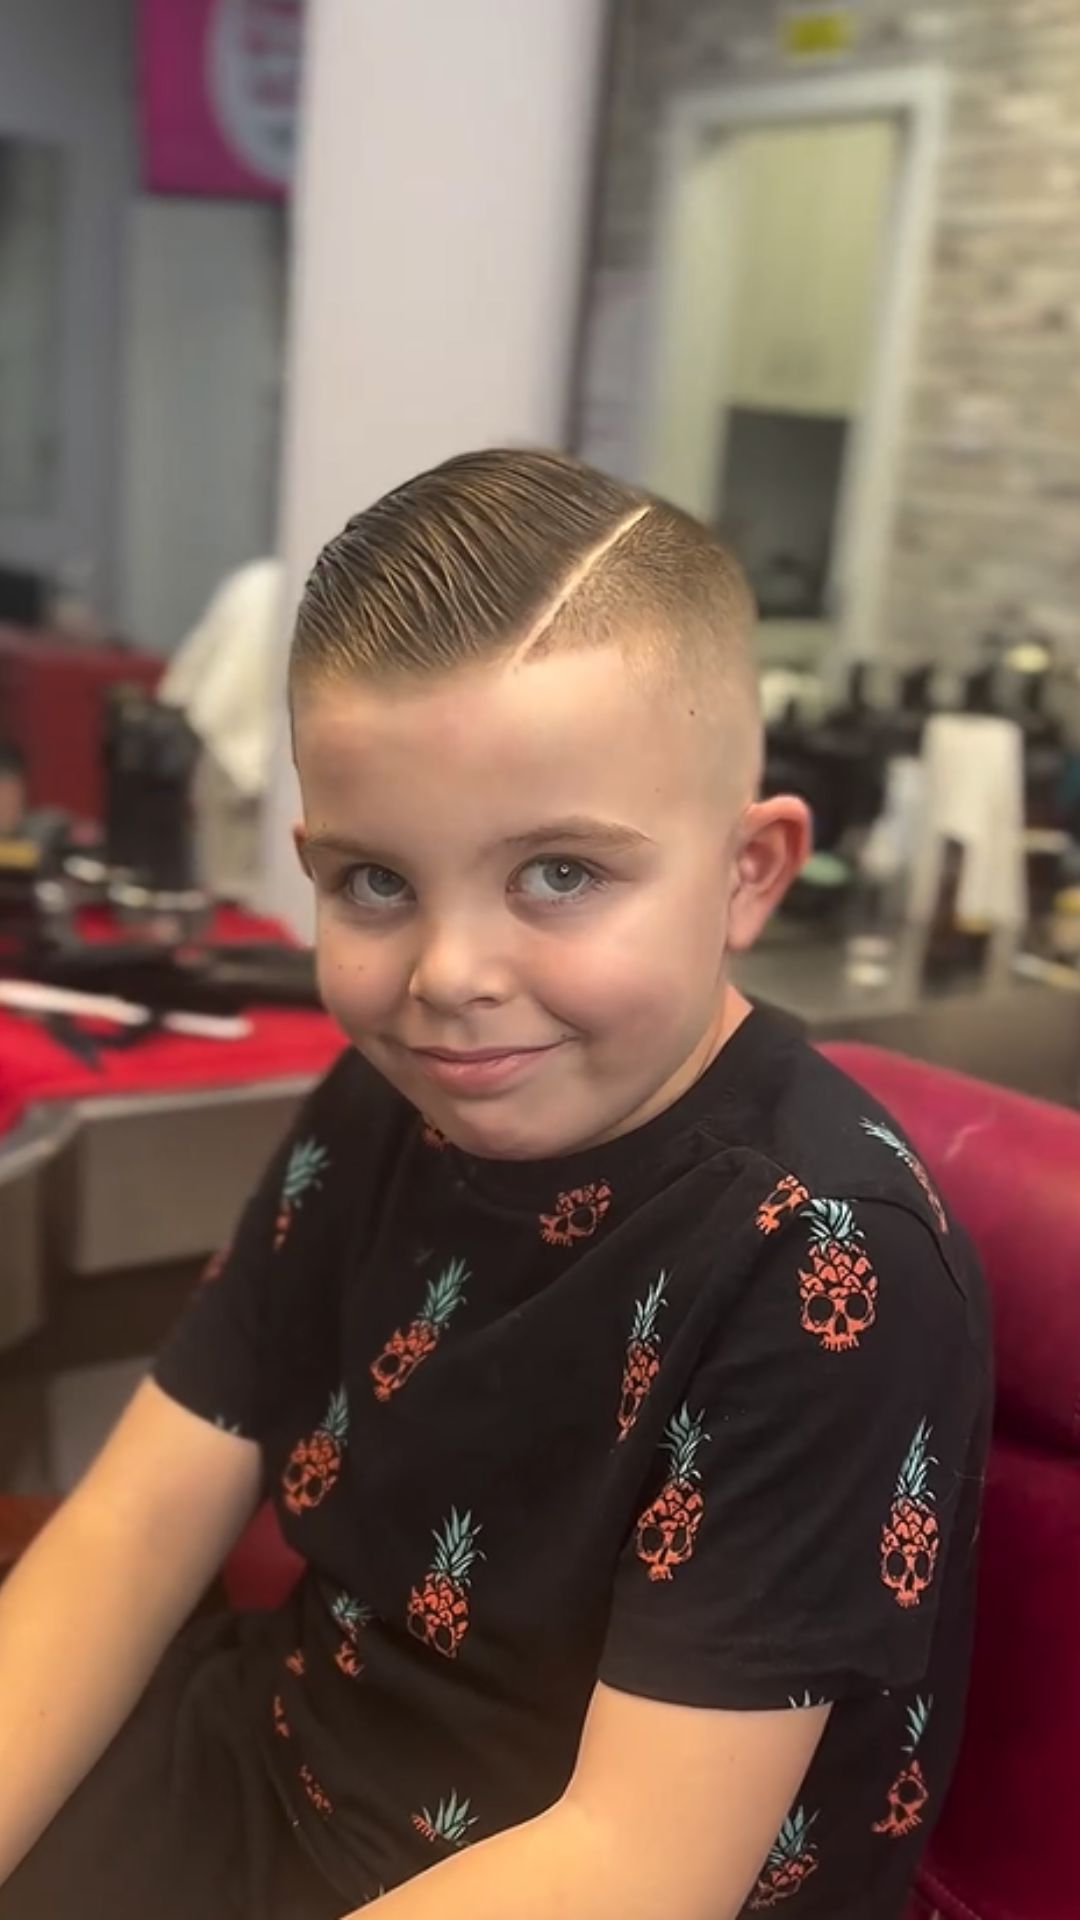 A boy with a comb over cut.